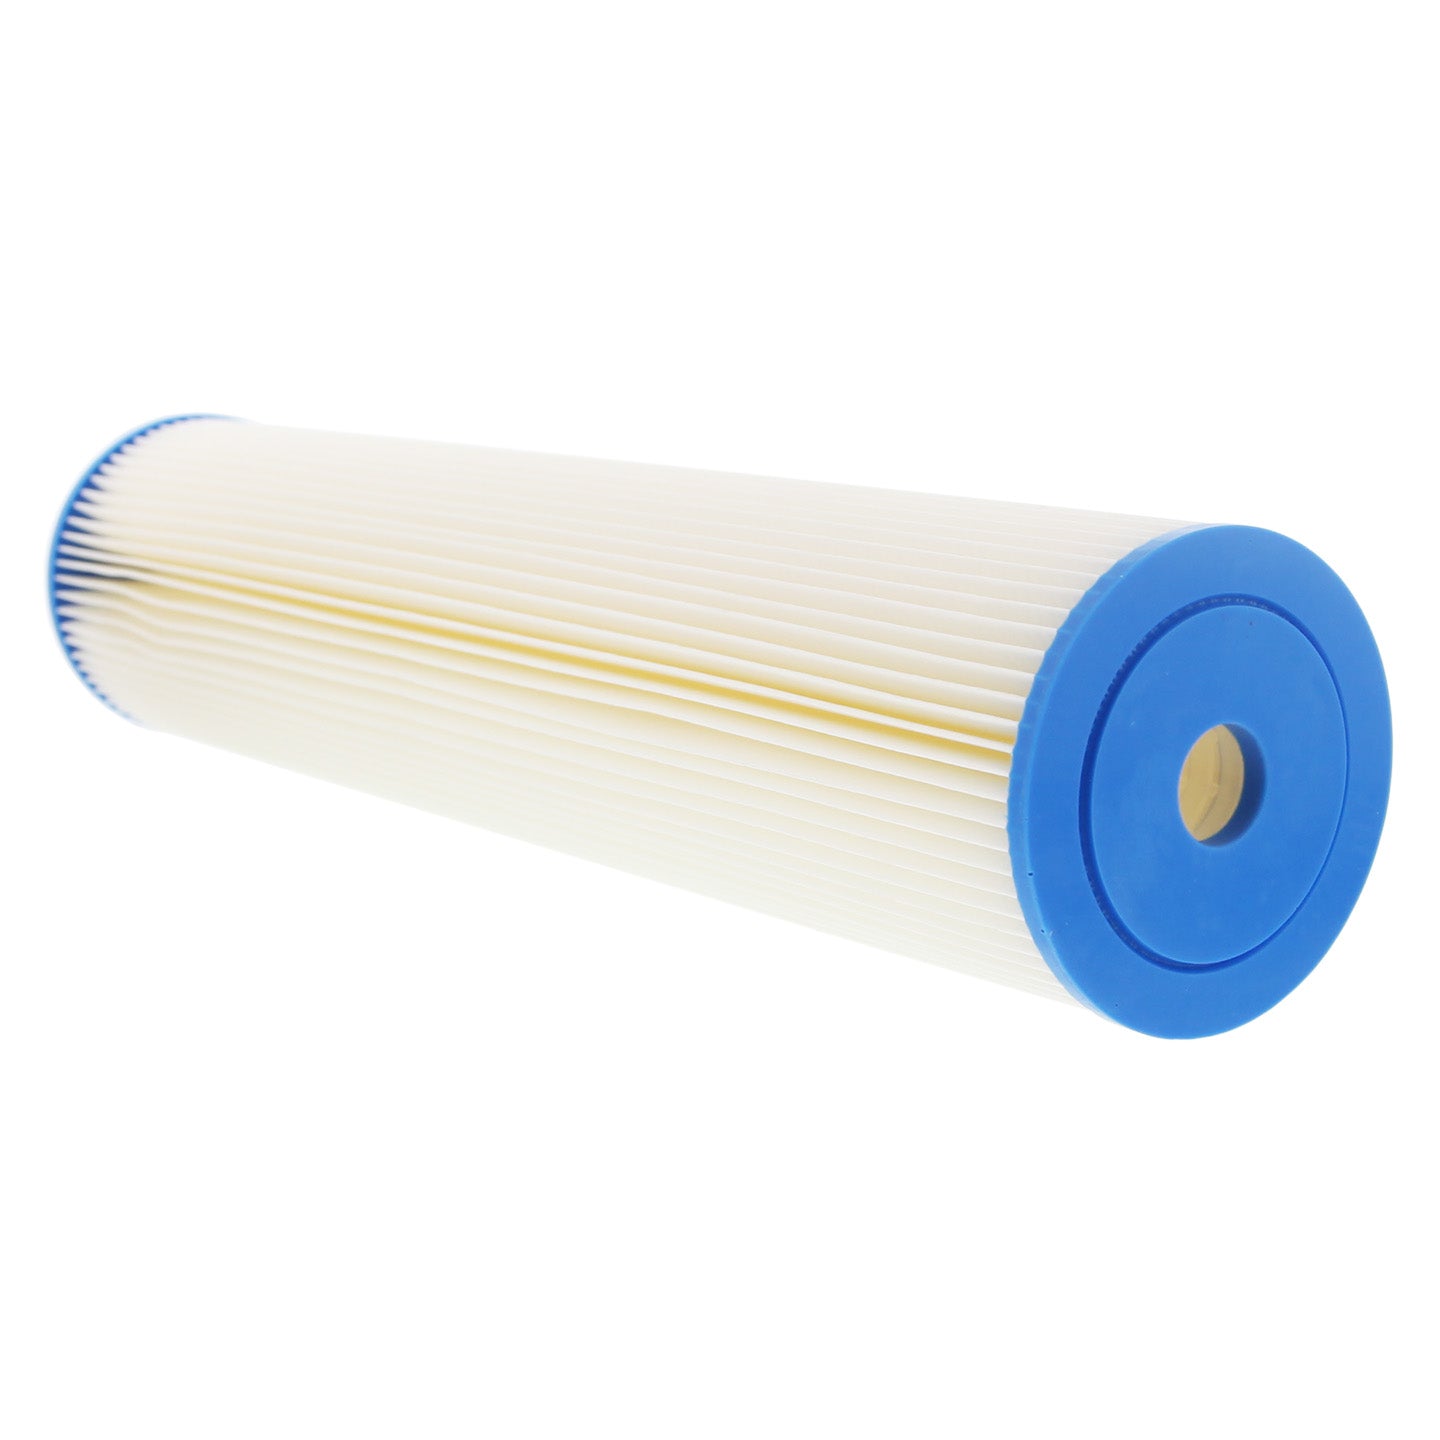 20 X 4.5 Pleated Cellulose Replacement Filter by Tier1 (20 micron)